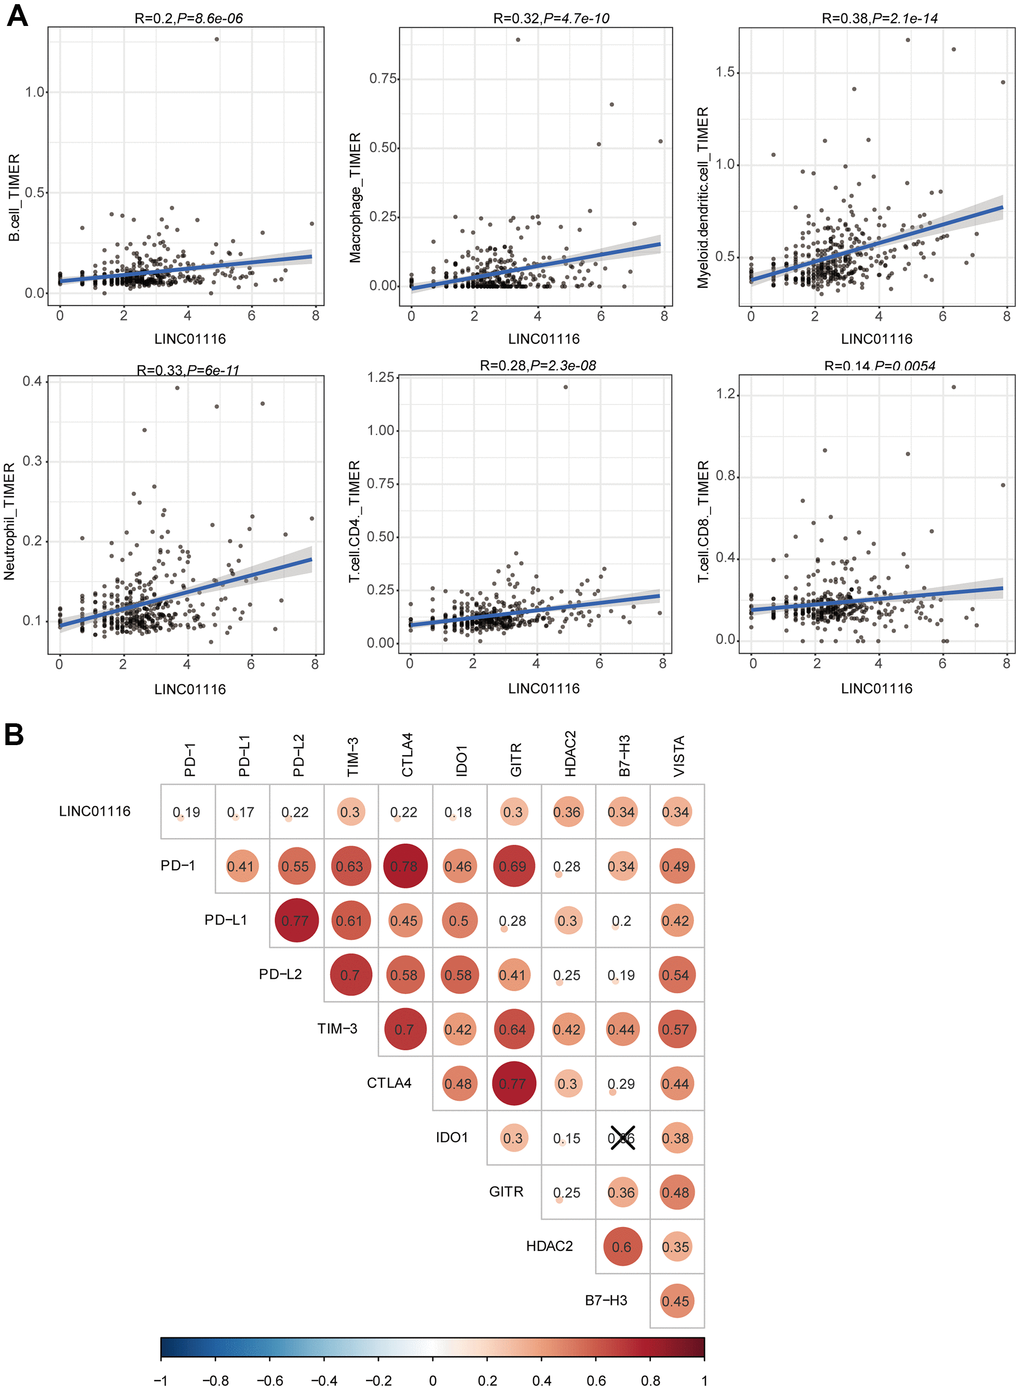 (A) Correlation analyses of LINC01116 with immune cell infiltration based on TIMER database. (B) Correlation analyses of LINC01116 with immune checkpoint targets.